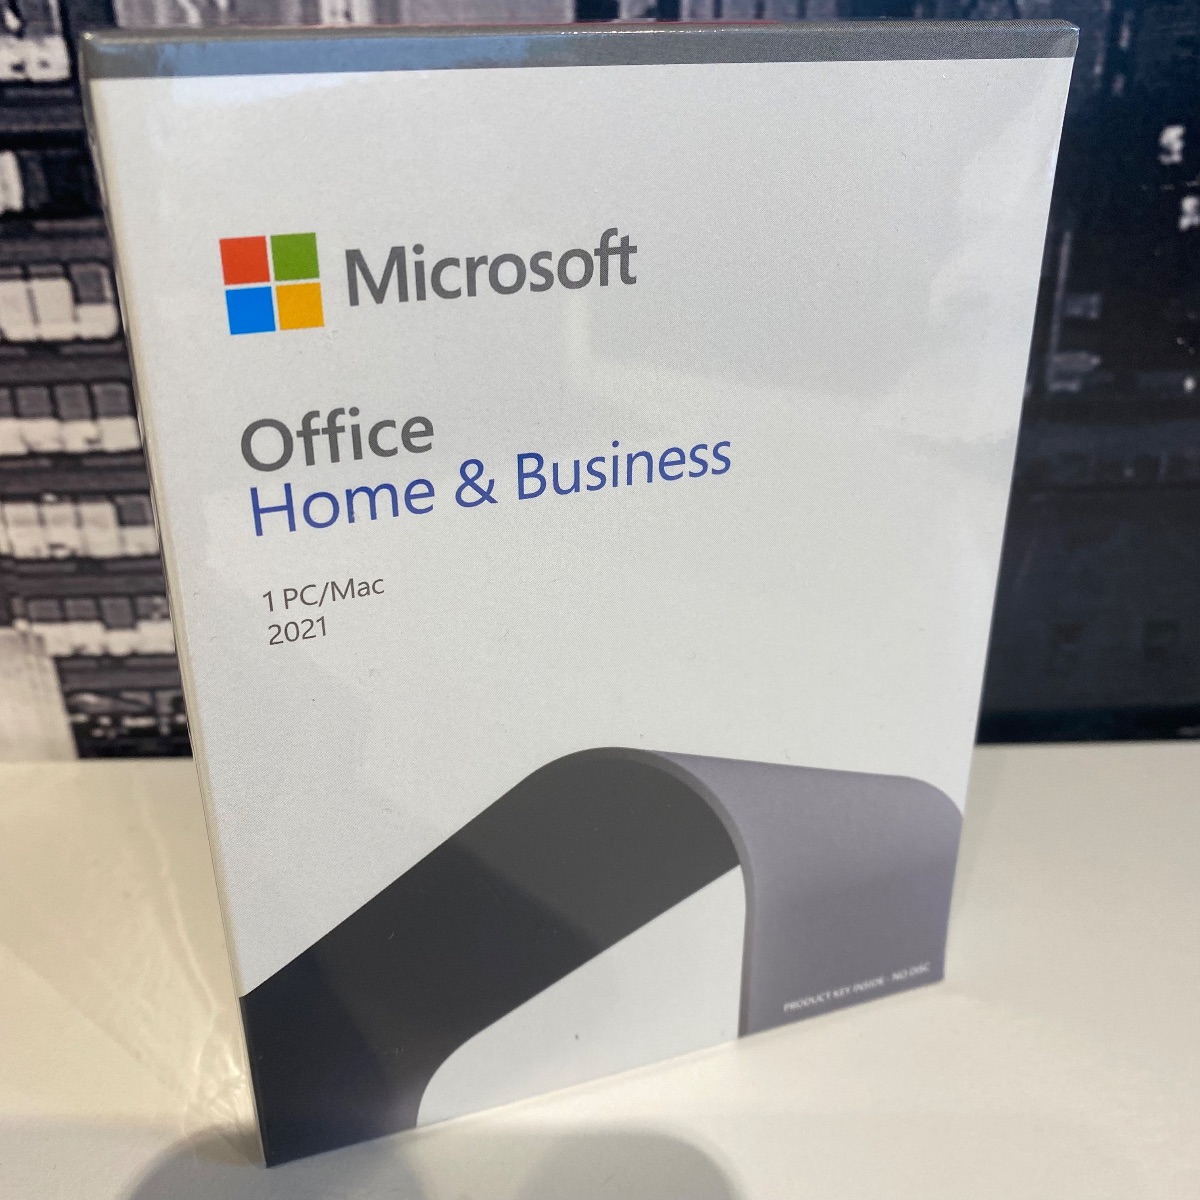 Microsoft Office 2021 Home and Business Word Excel Outlook 365 2019 100% Genuine T5D-03511 889842853001 (Brand New & Sealed)